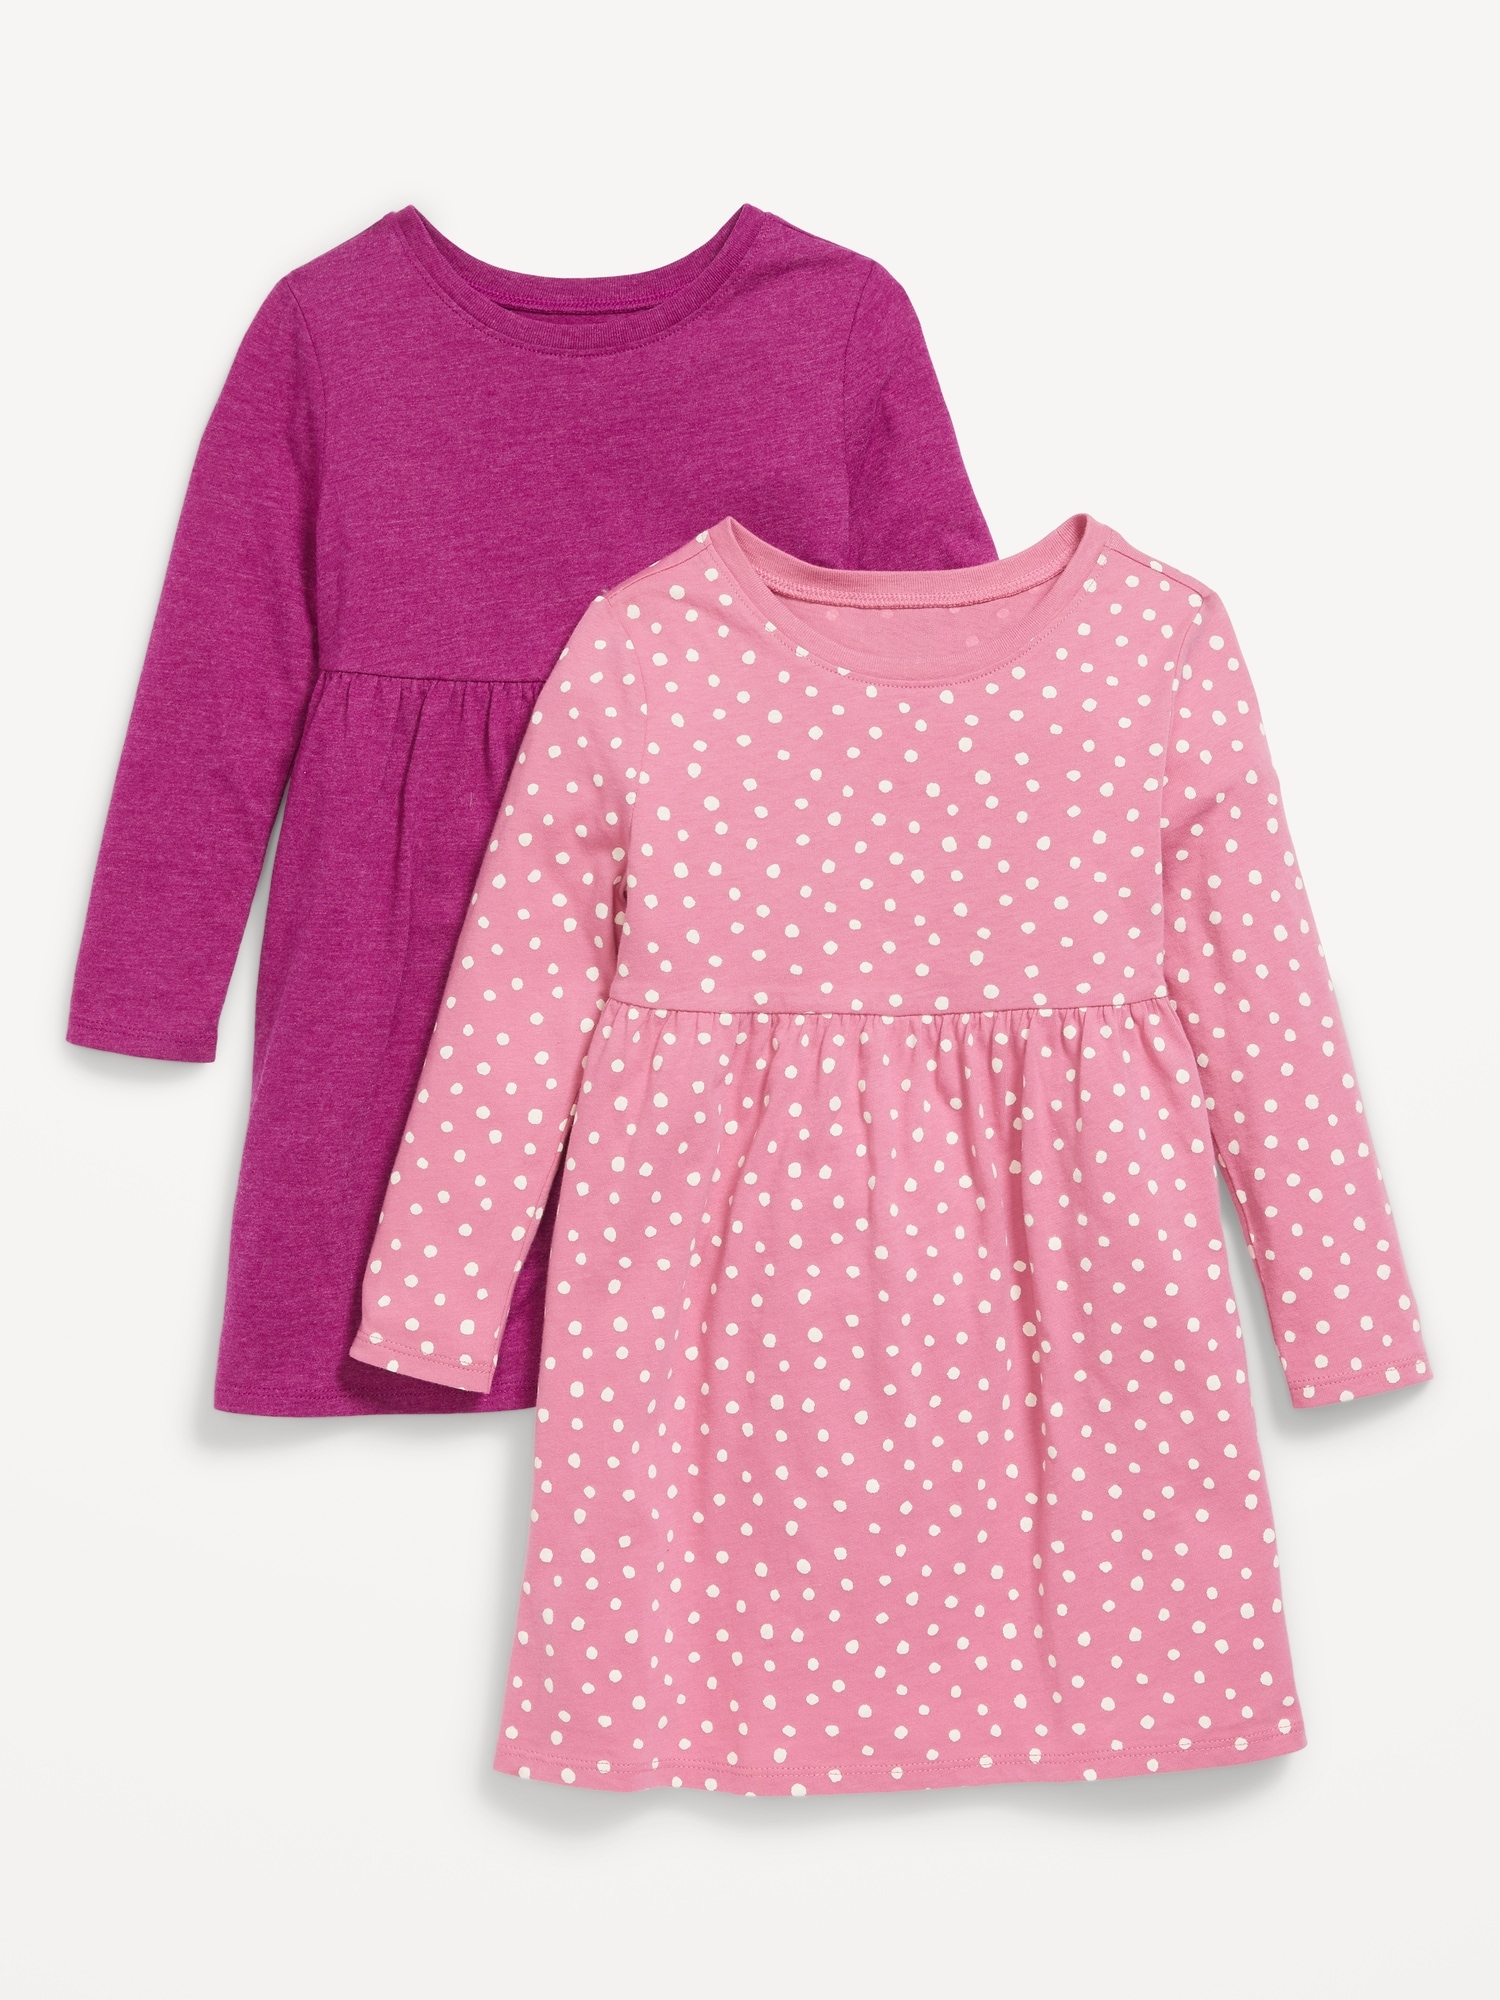 Long-Sleeve Fit & Flare Dress 2-Pack for Toddler Girls